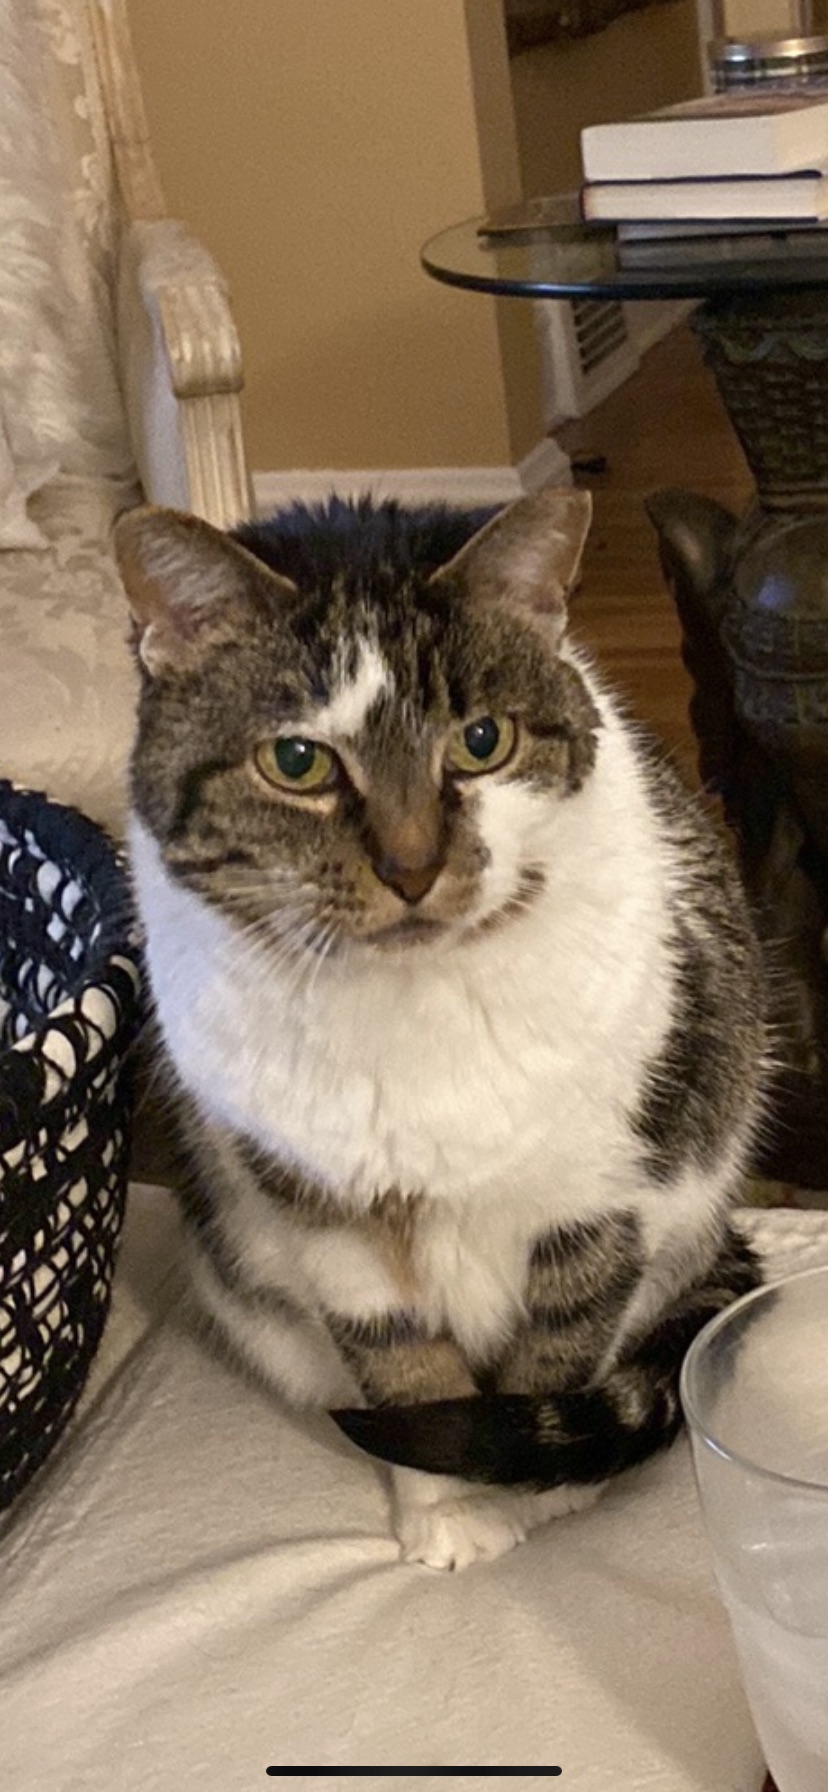 Image of Dixie, Lost Cat